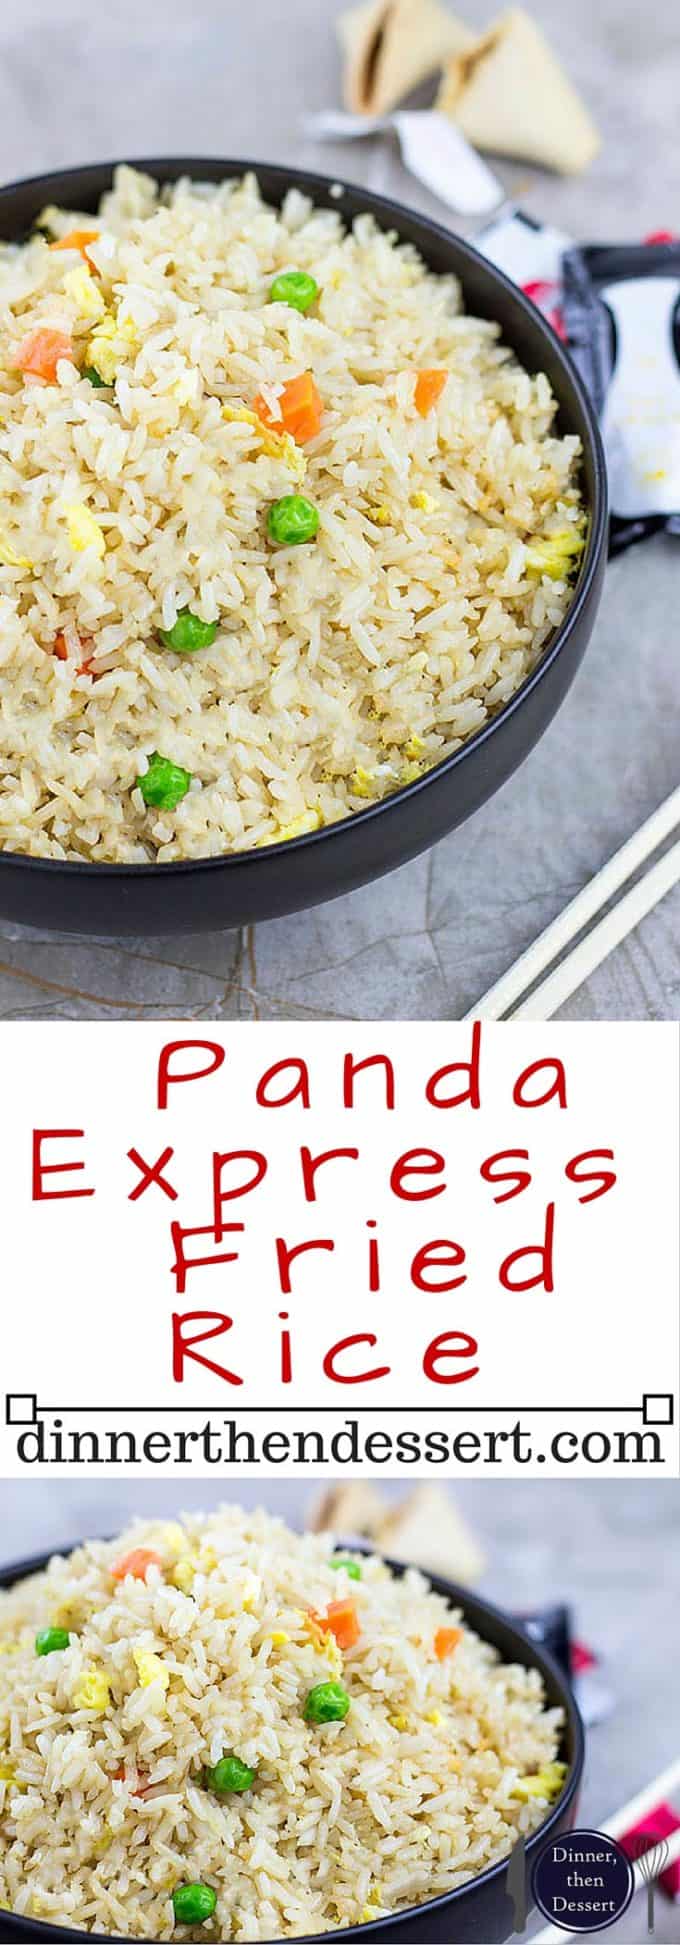 Panda Express Fried Rice is the most popular side ordered and with good reason. Salty and savory, with veggies mixed in the rice is a great counterpart to your favorite two entree plate...at home!